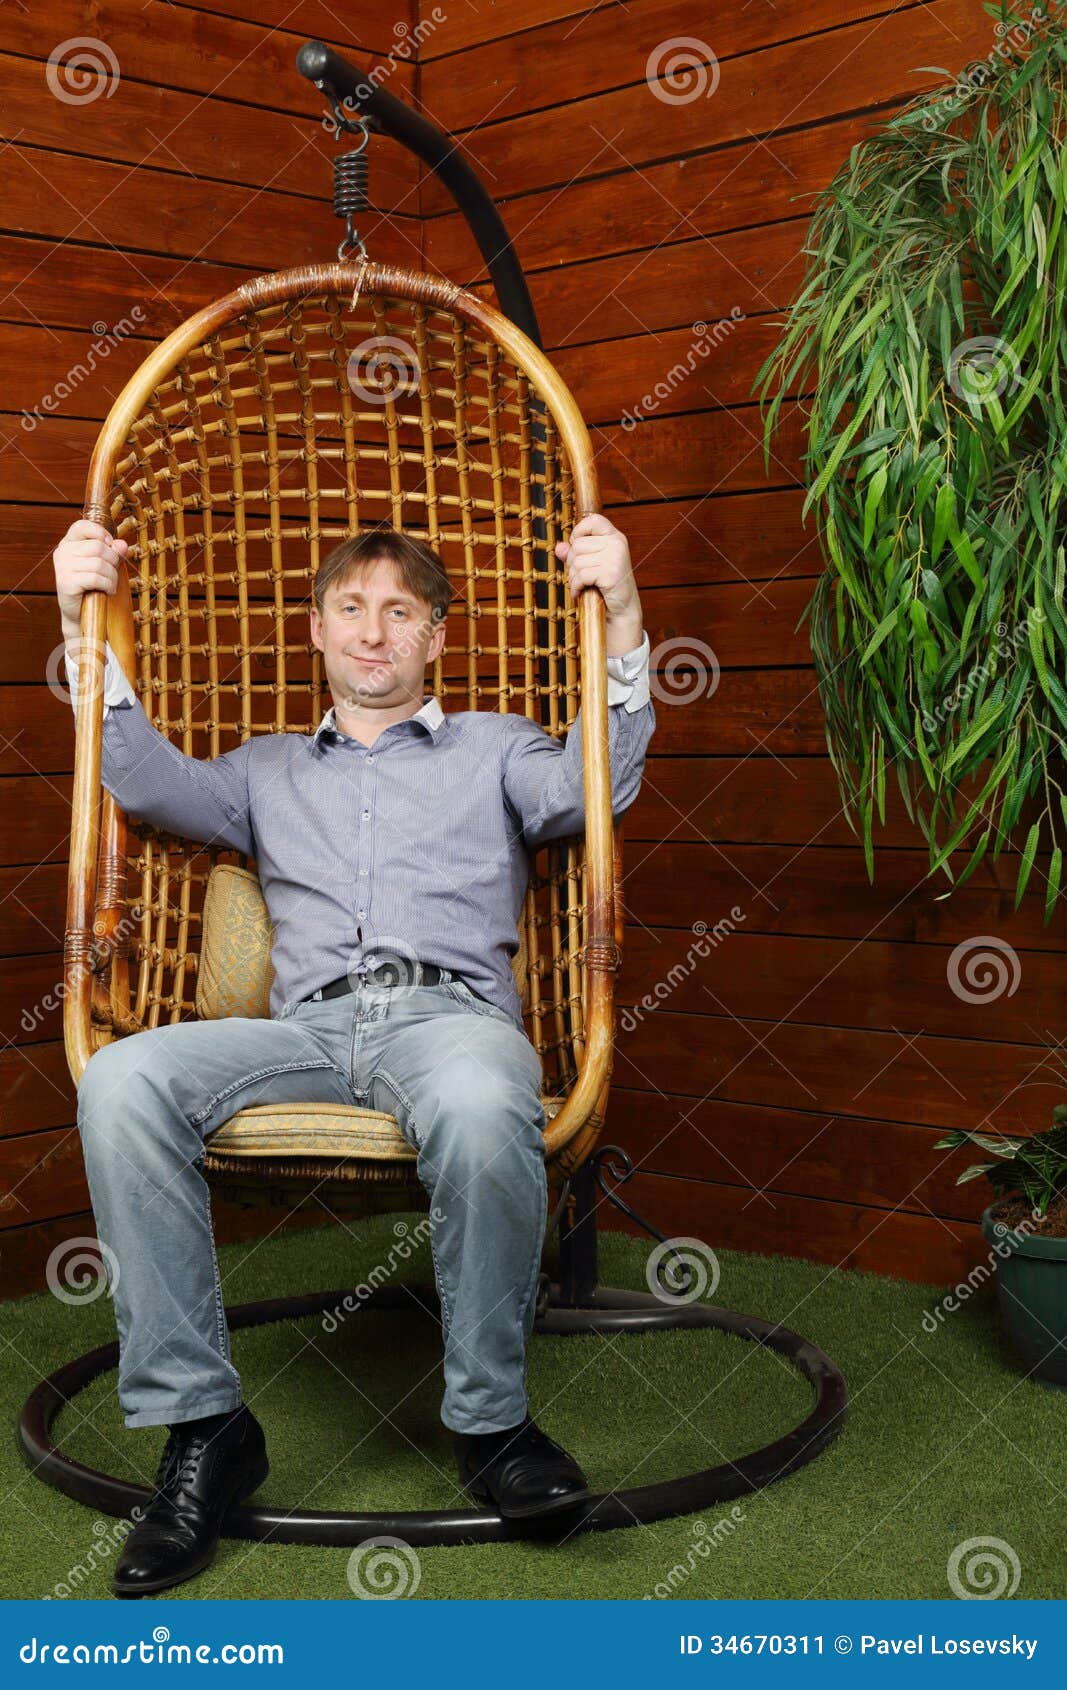 happy-man-sits-wicker-hanging-chair-near-wooden-wall-house-34670311.jpg